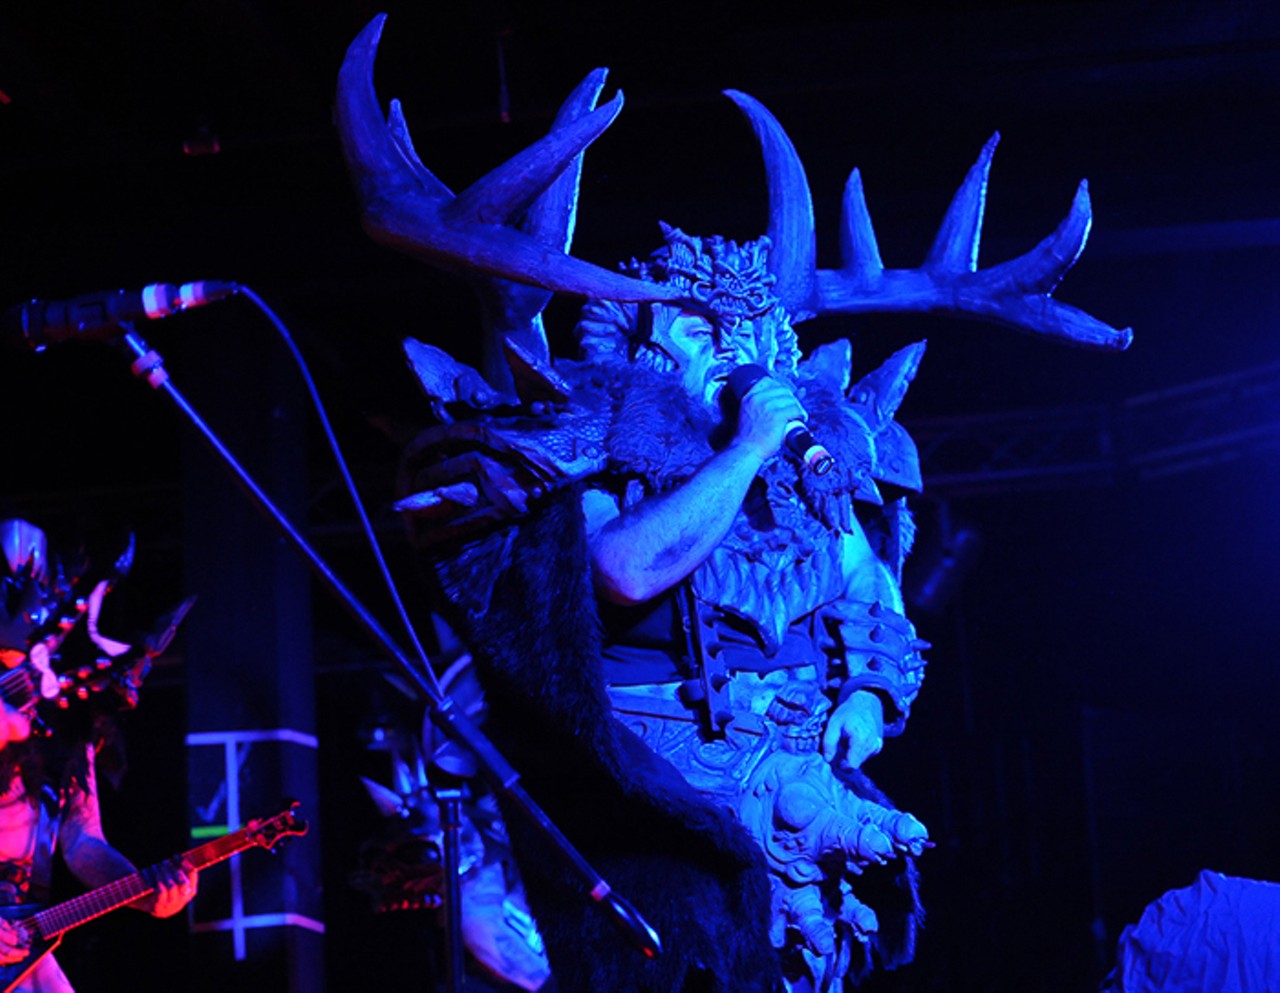 28 GWAR Photos To Supply You With Plenty of Nightmare Fuel